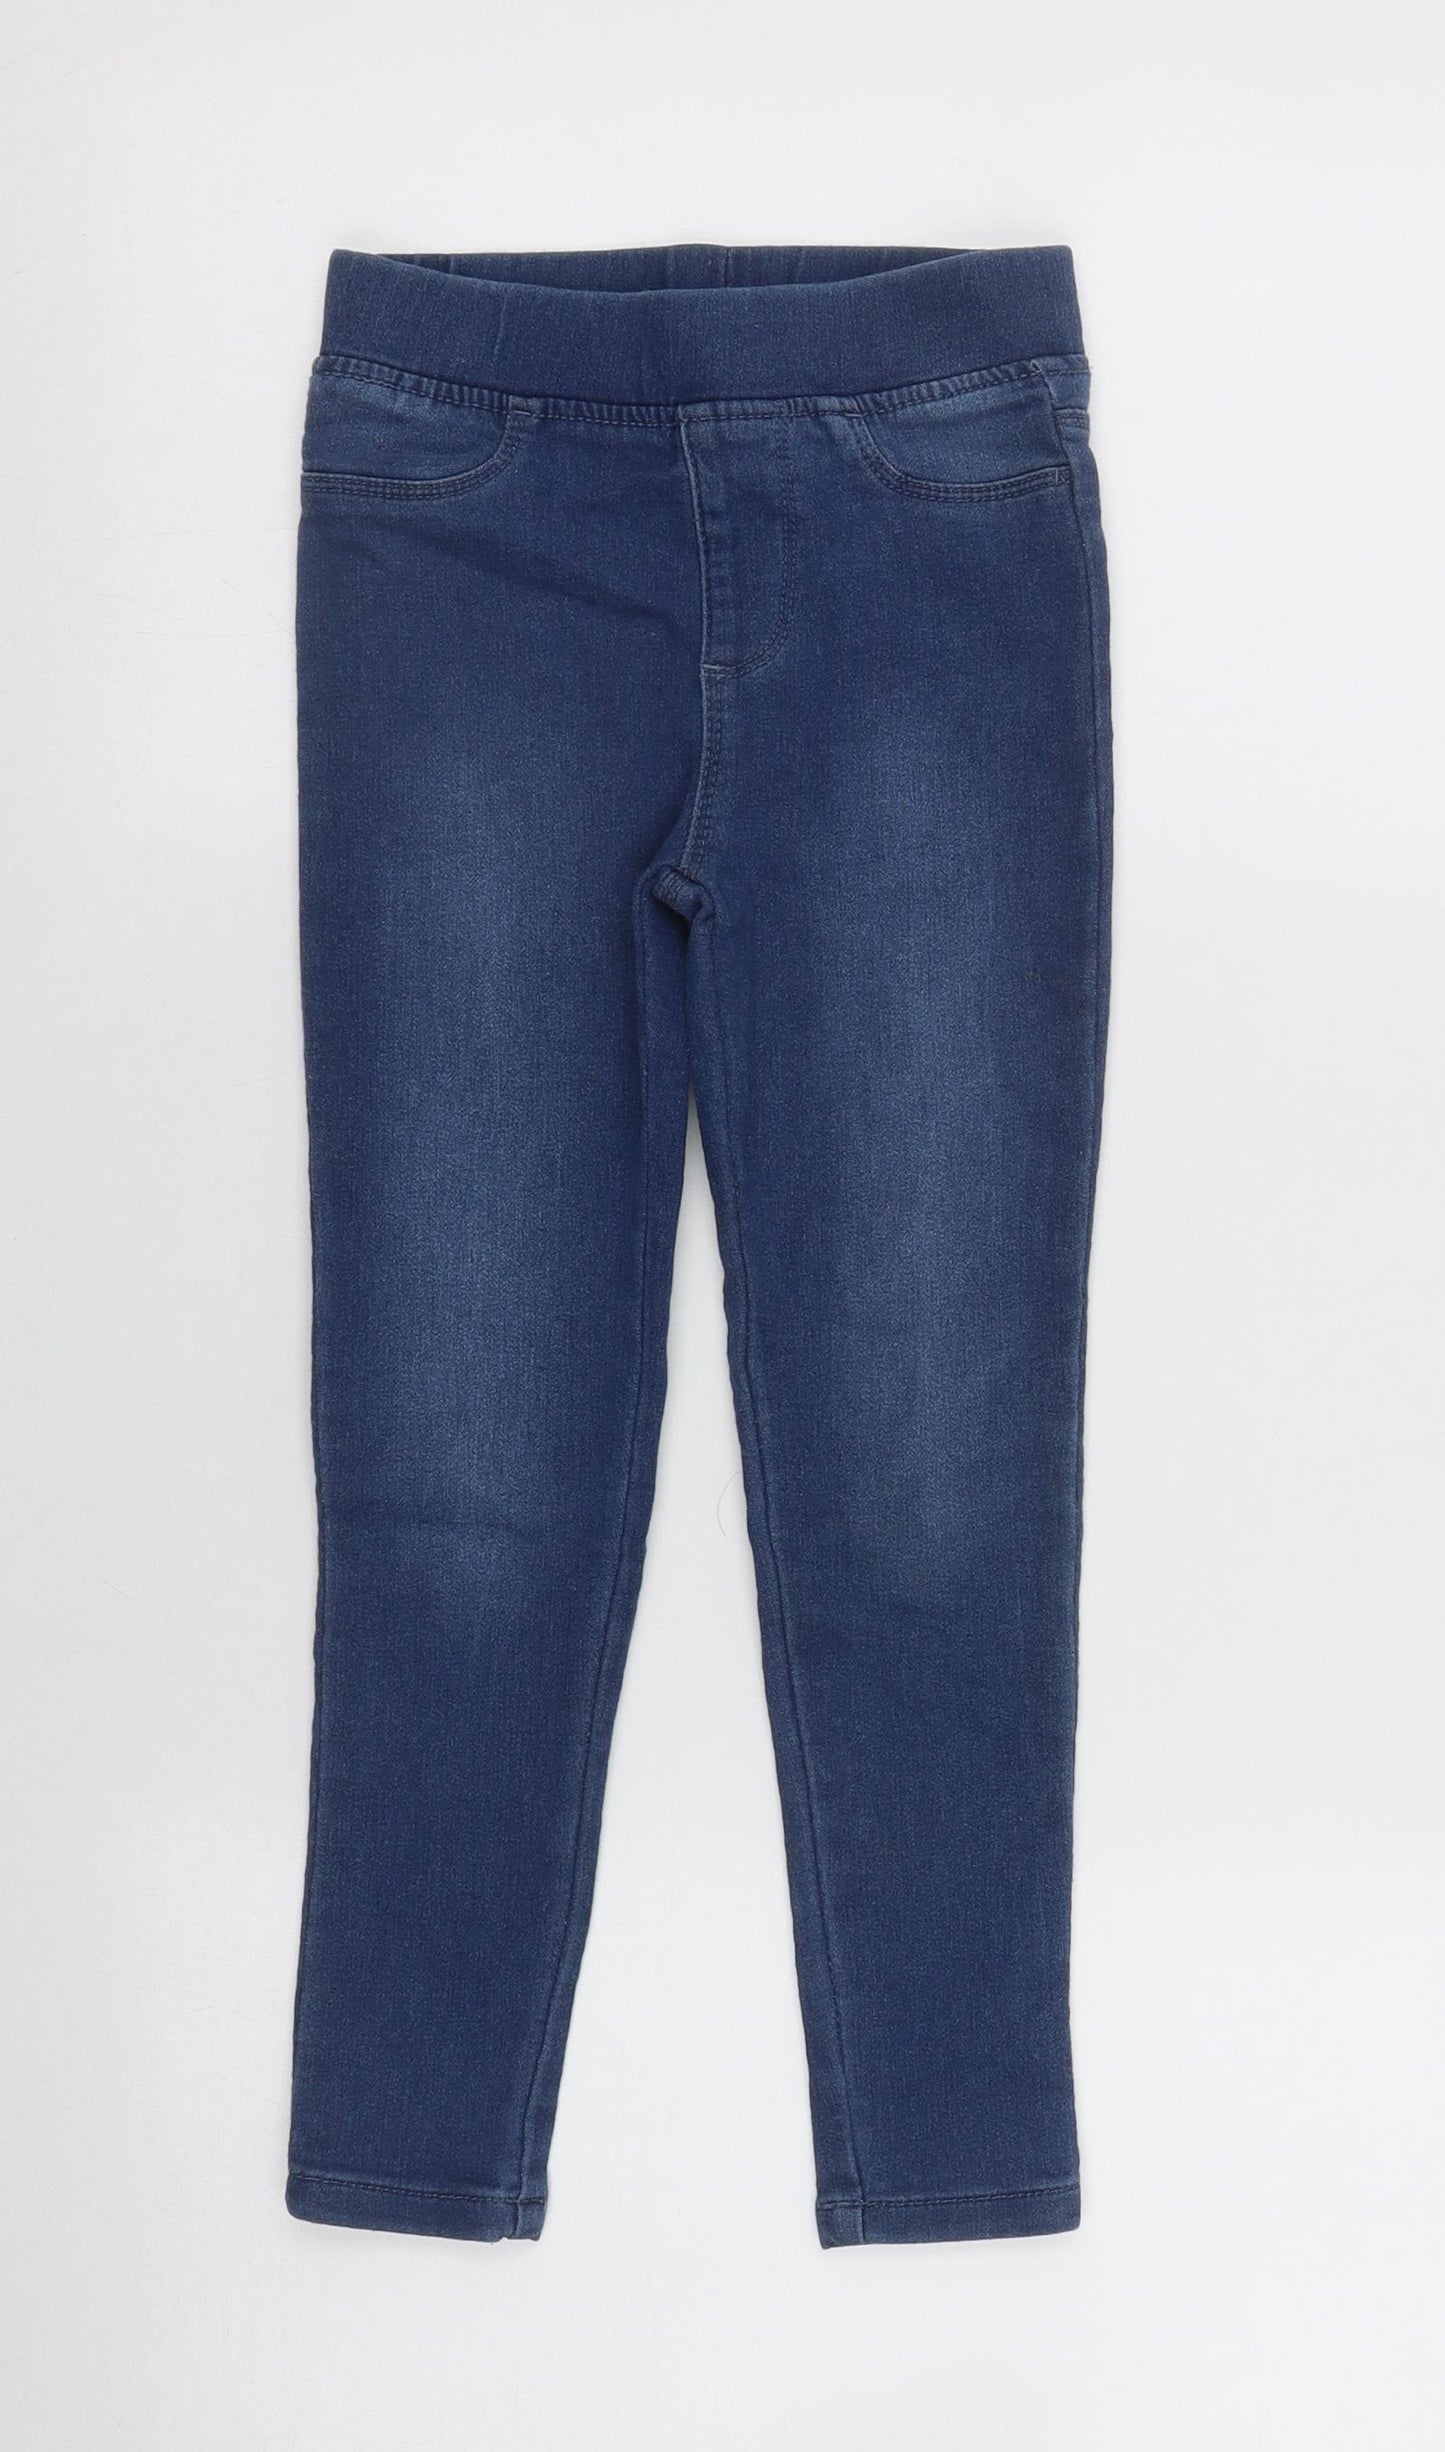 Dunnes Stores Girls Blue  Cotton Jegging Jeans Size 5-6 Years  Regular